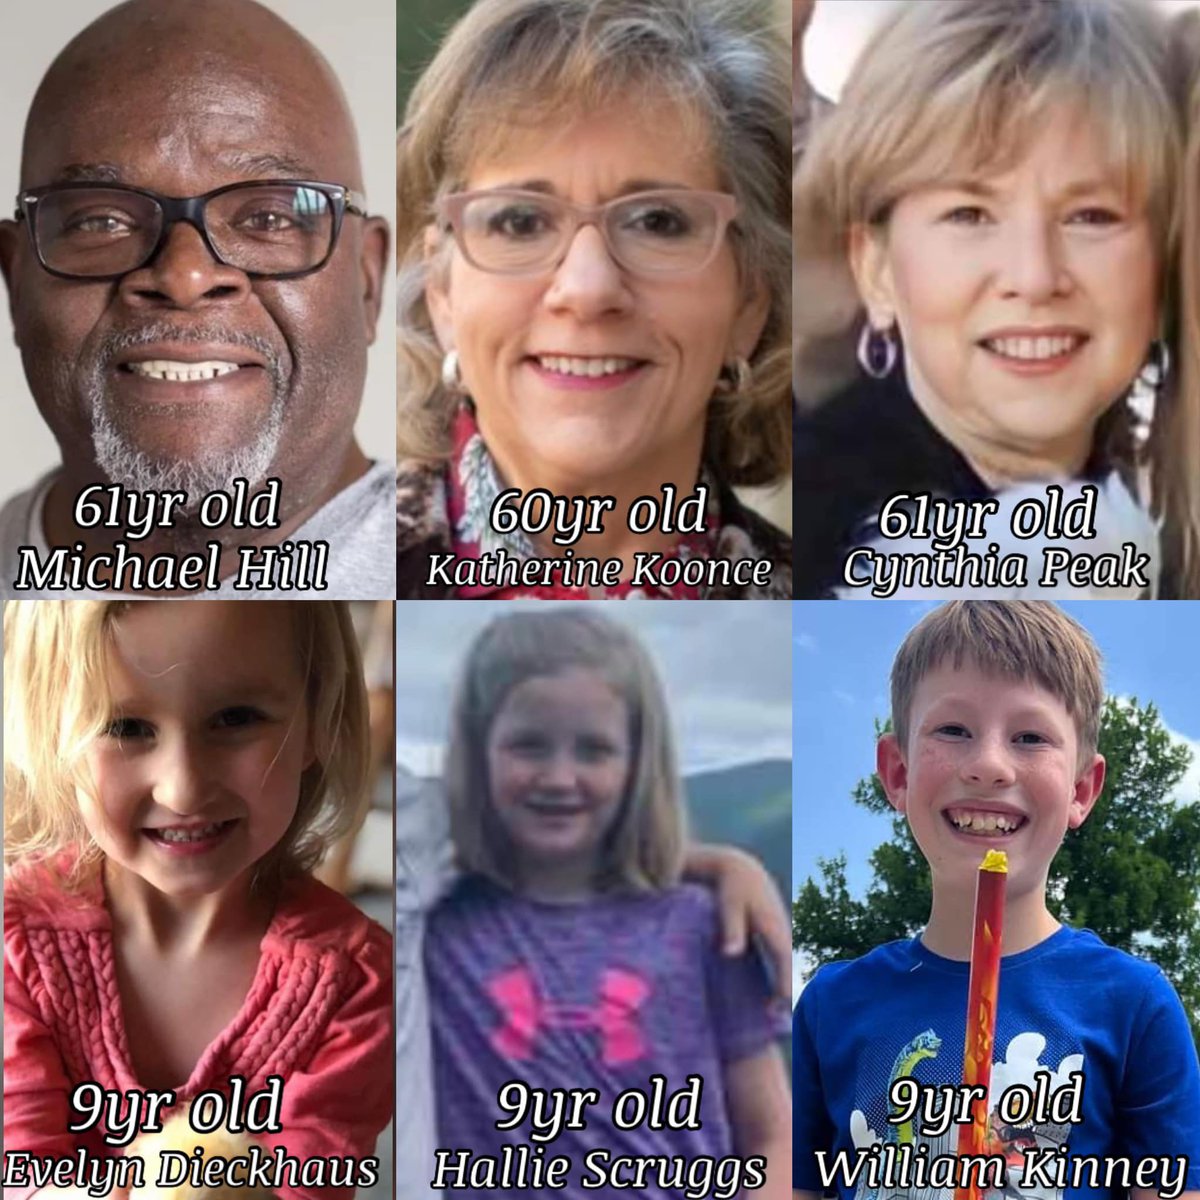 All six victims in Tennessee school shooting identified by authorities. 9 year old Hallie Scruggs was a 3rd grader; daughter of a pastor  ; 9 year old Evelyn Dieckhaus was a 3rd grader at the school who was known as a hero.  9 year old William Kinney was 3rd